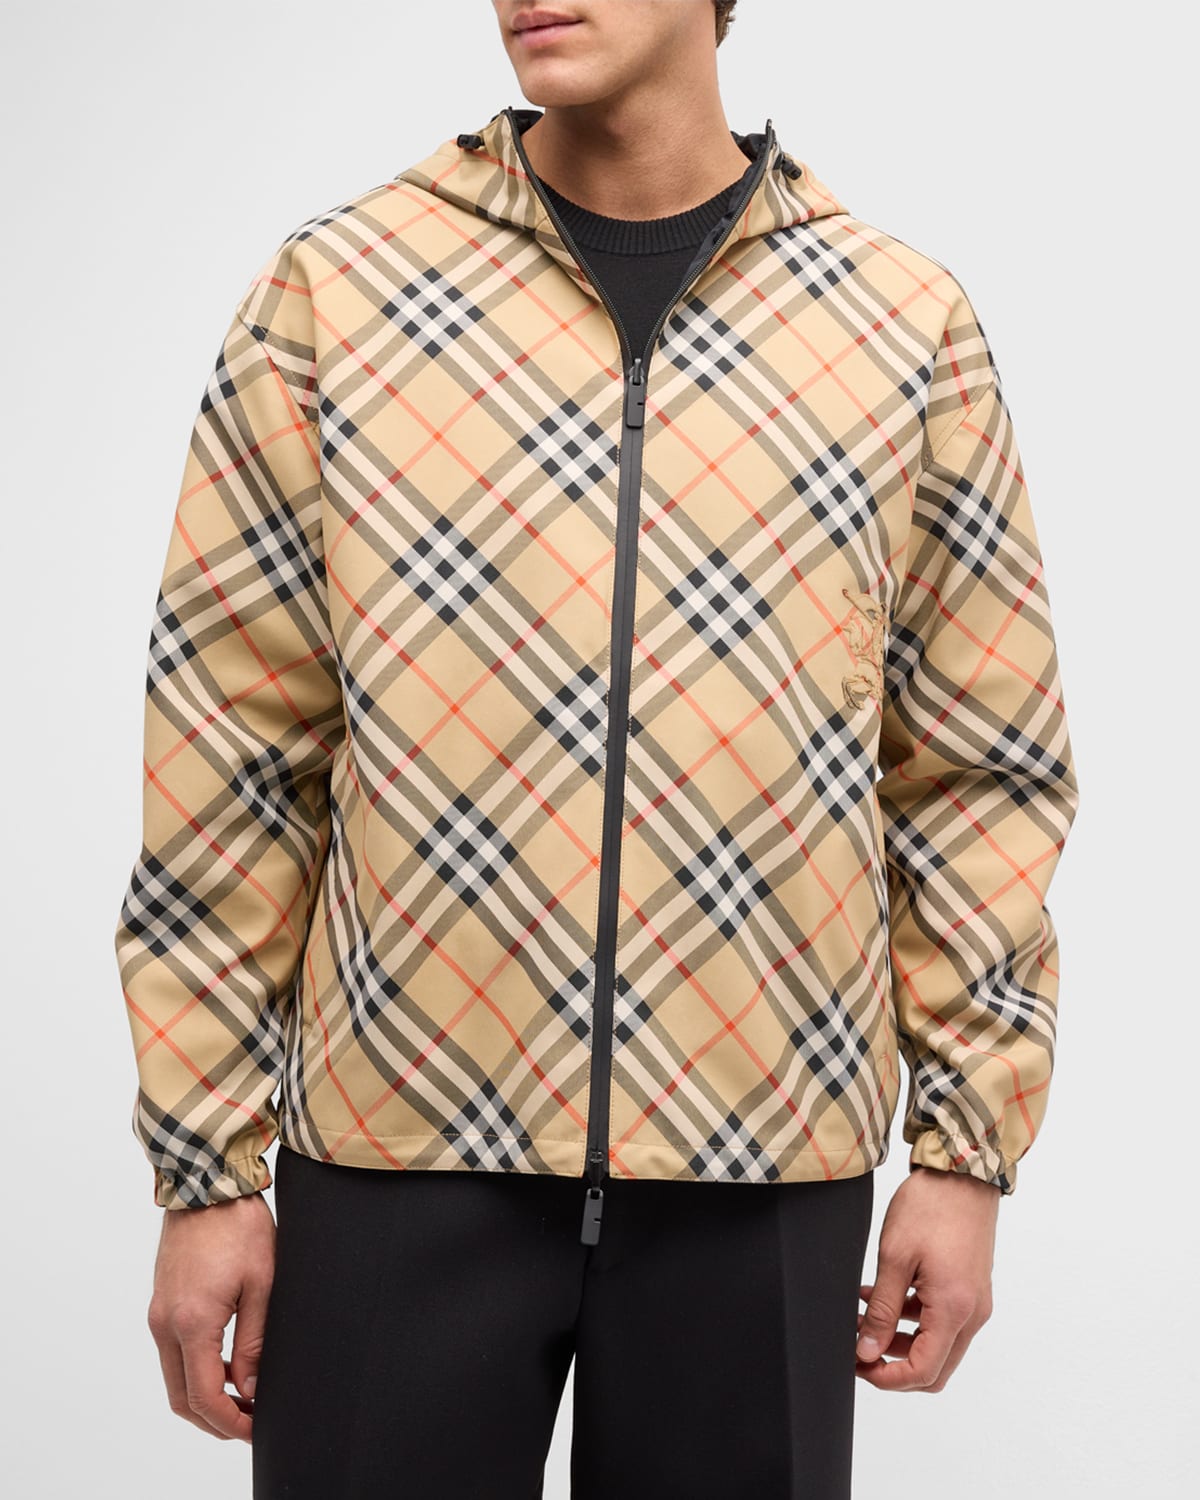 Burberry Men's Stretton Vintage Check Jacket In Sand Ip Check